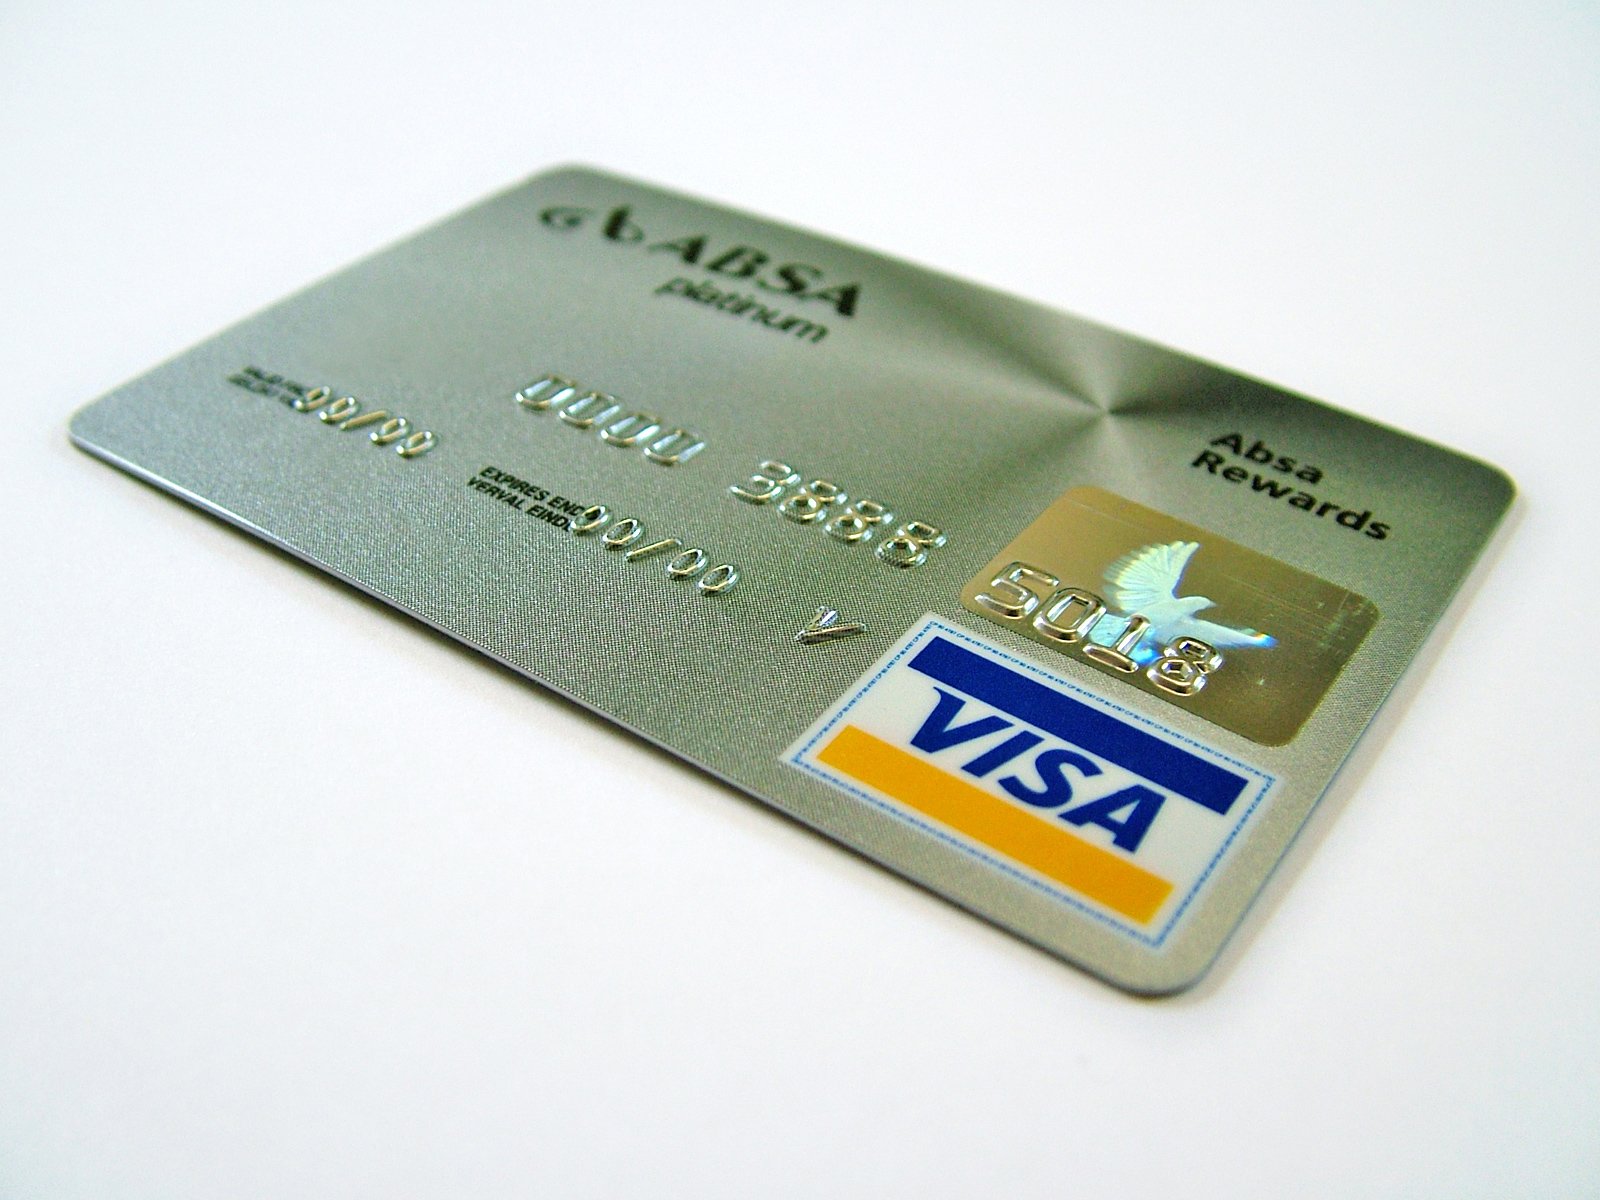 silver credit card against a white background